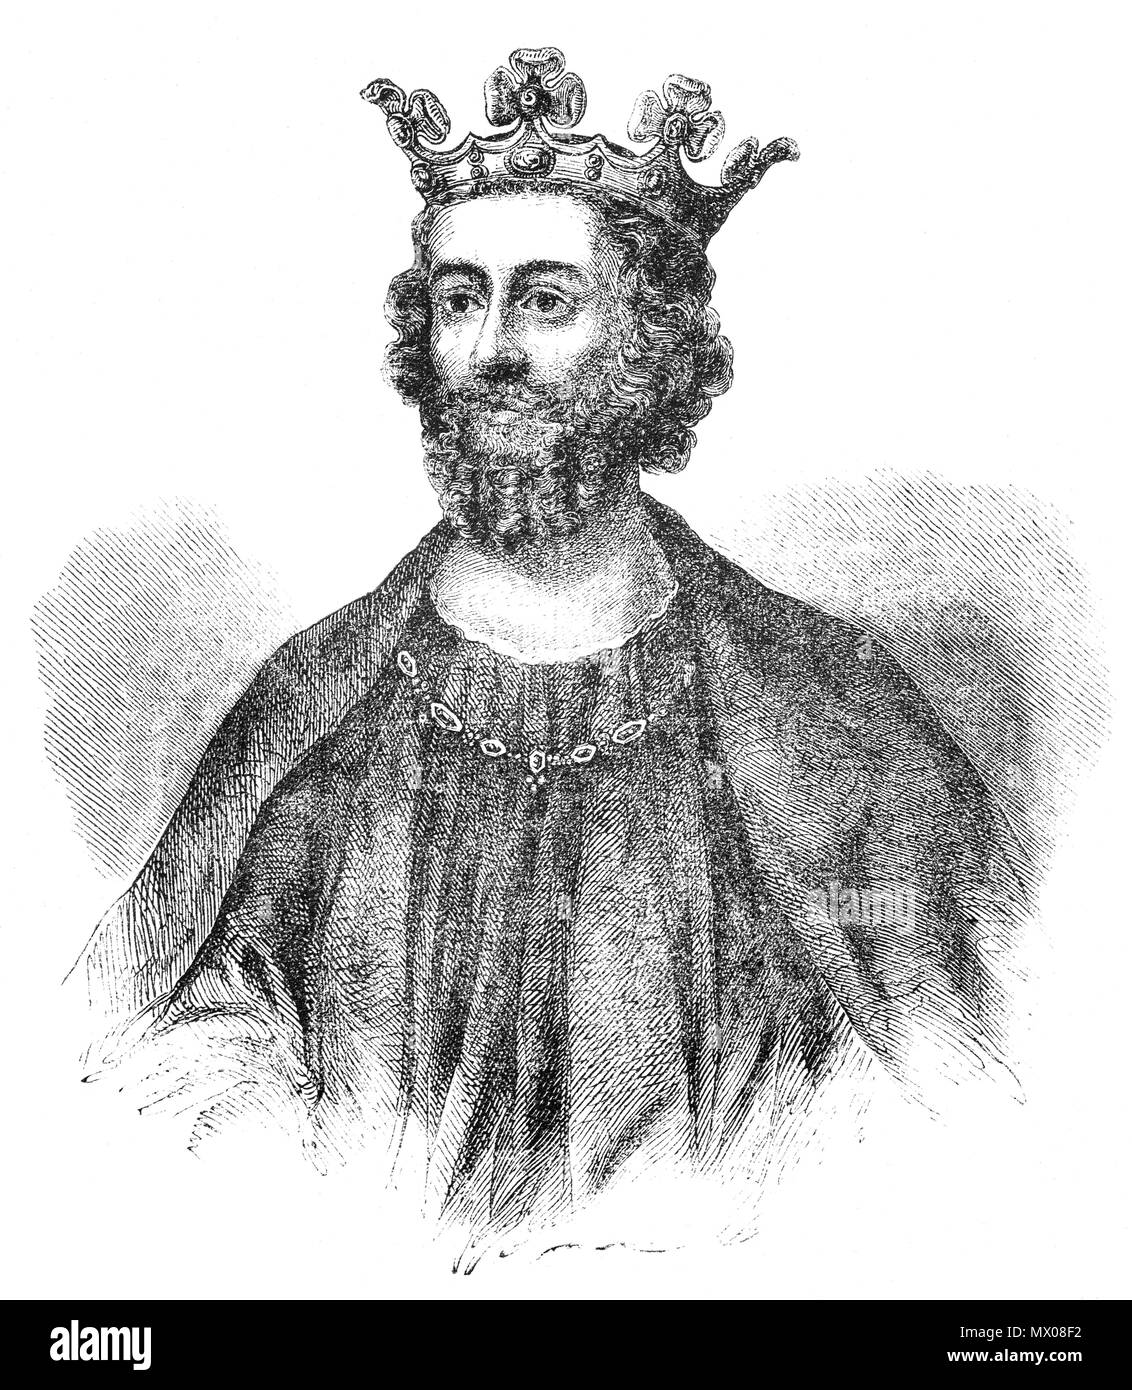 A portrait of King Edward II (1284 – 1327), King of England from 1307 until he was deposed in January 1327. He became the heir apparent to the throne following the death of his older brother Alphonso. Beginning in 1300, Edward accompanied his father on campaigns to pacify Scotland, and in 1306 he was knighted in a grand ceremony at Westminster Abbey. Edward succeeded to the throne in 1307, following his father's death. In 1308, he married Isabella of France, the daughter of King Philip IV, as part of a long-running effort to resolve the tensions between the English and French crowns. Stock Photo